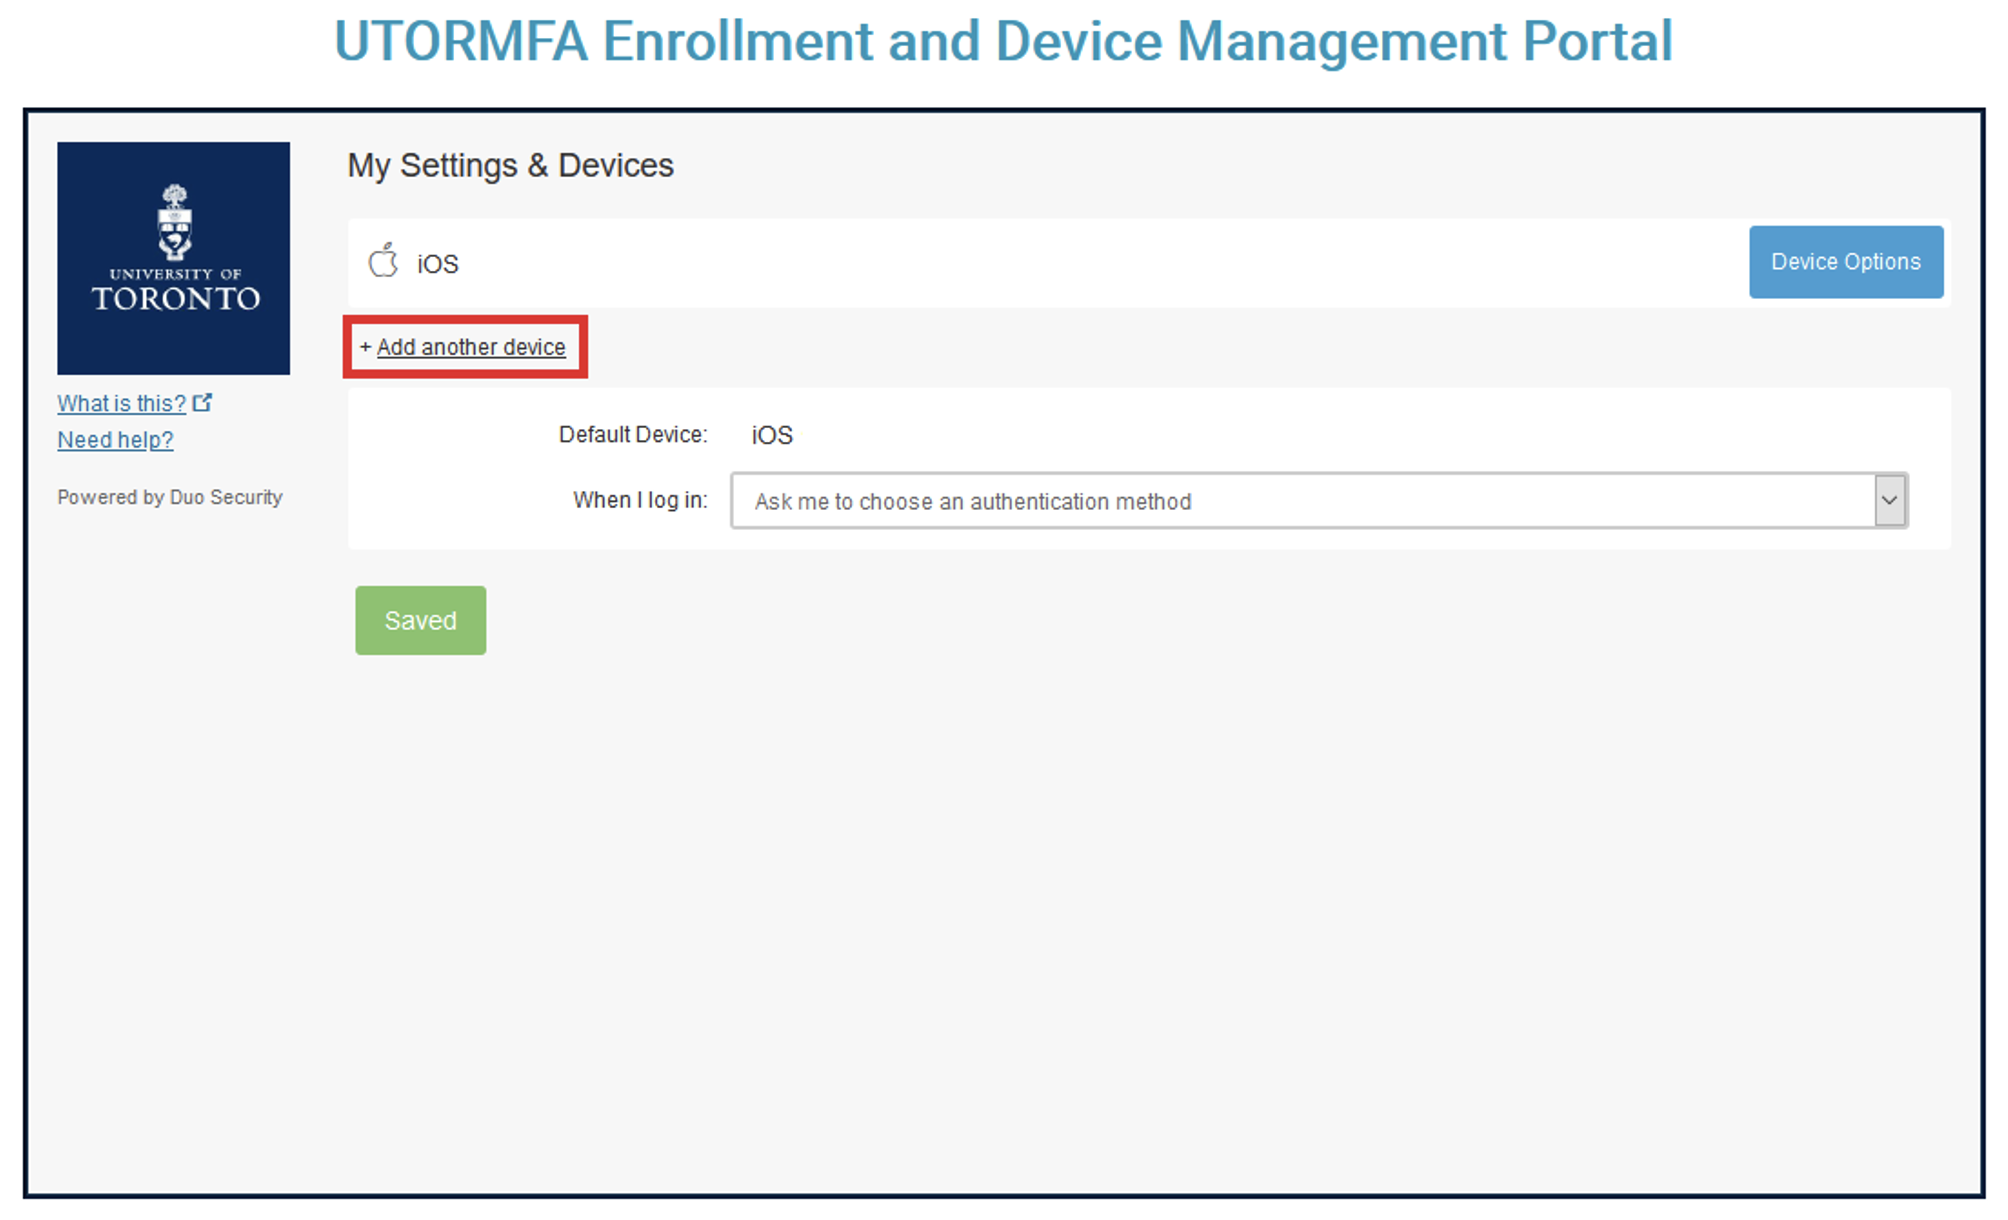 Screenshot of the UTORMFA enrollment and device management portal with the option "Add another device" highlighted.